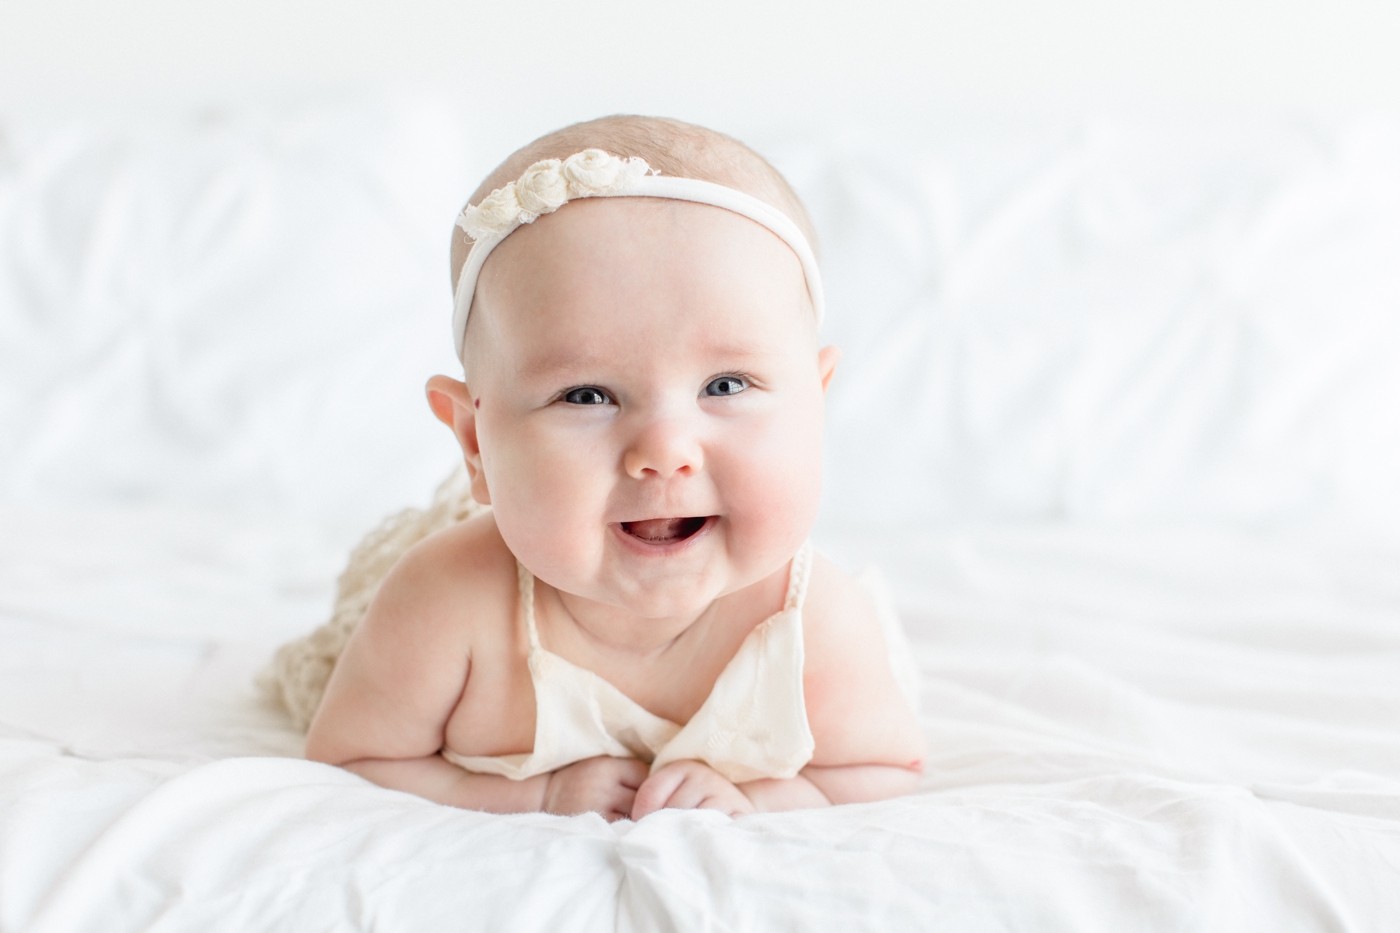 Baby girl doing tummy time and smiling during studio family session in Austin, TX. Photo by Sana Ahmed Photography.